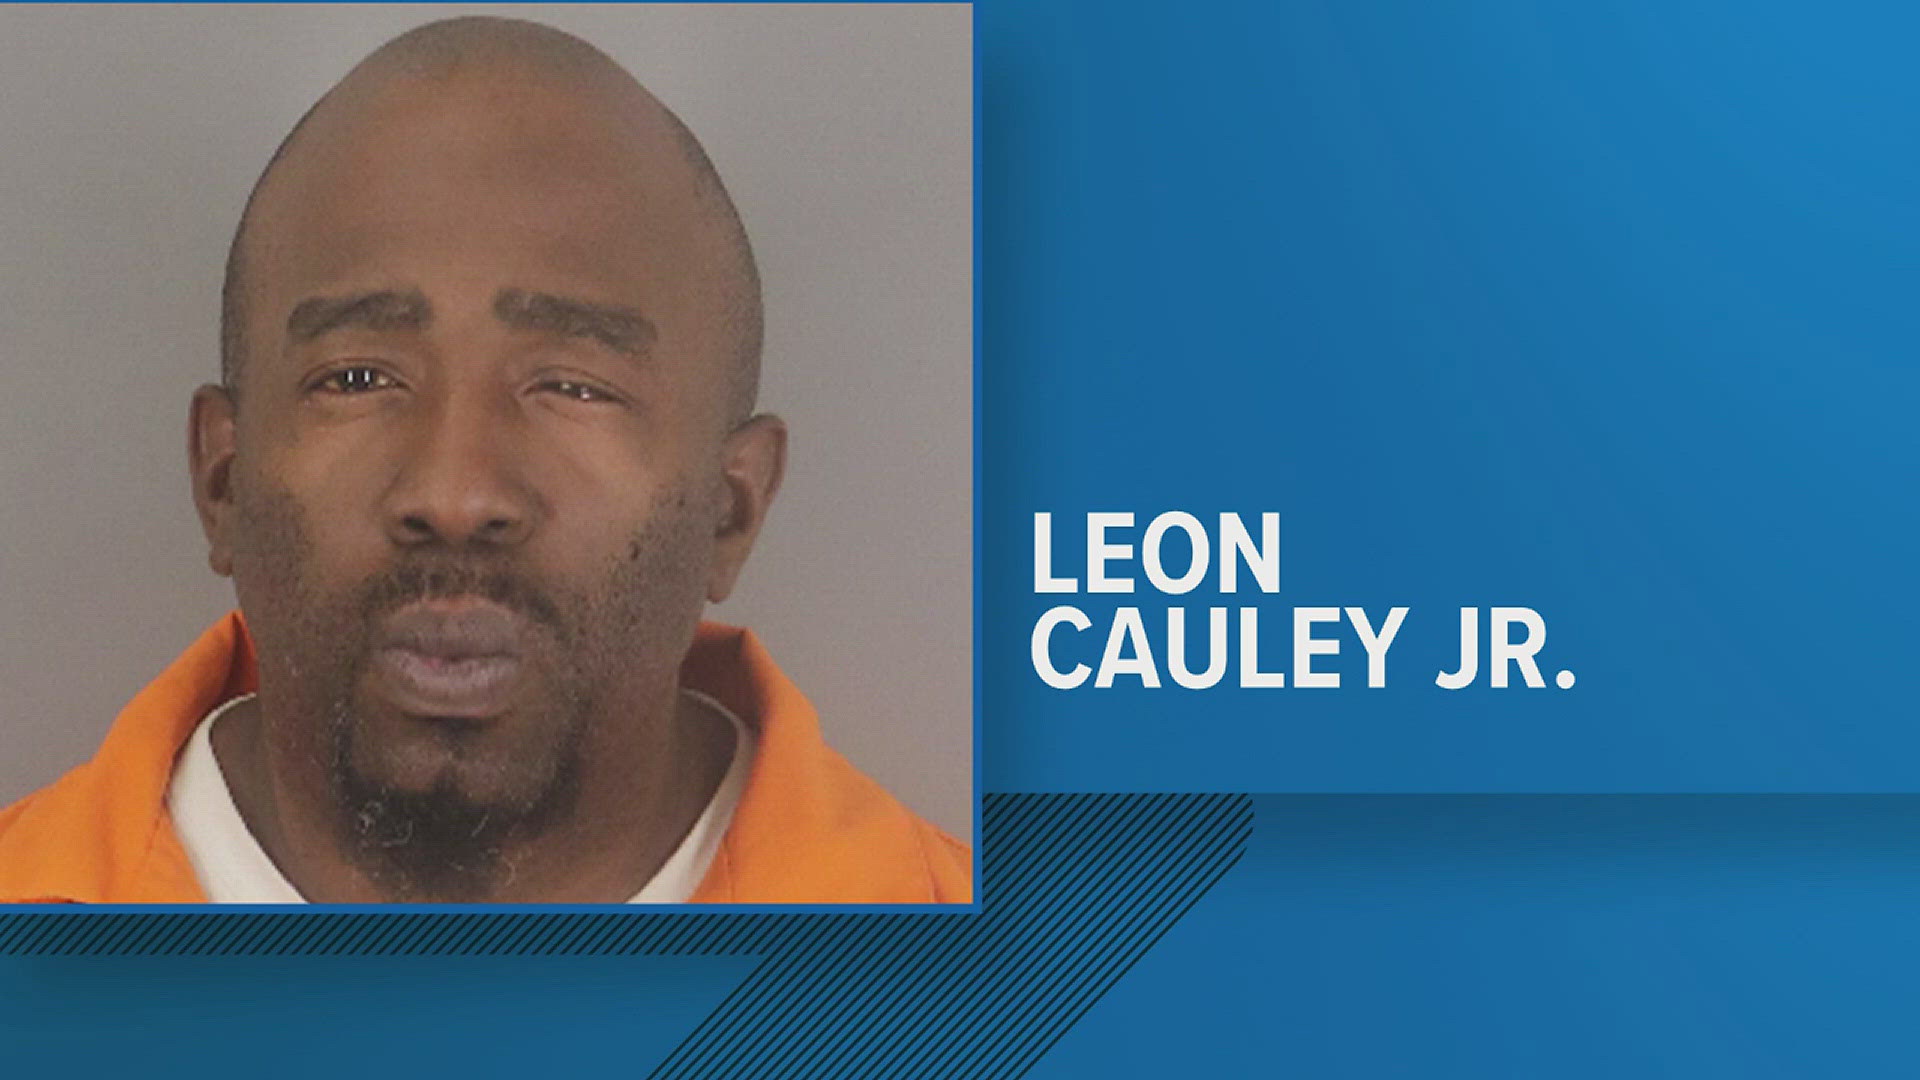 39-year-old Leon Cauley Jr. was found guilty of injury to a disabled person with intent to cause serious bodily injury.